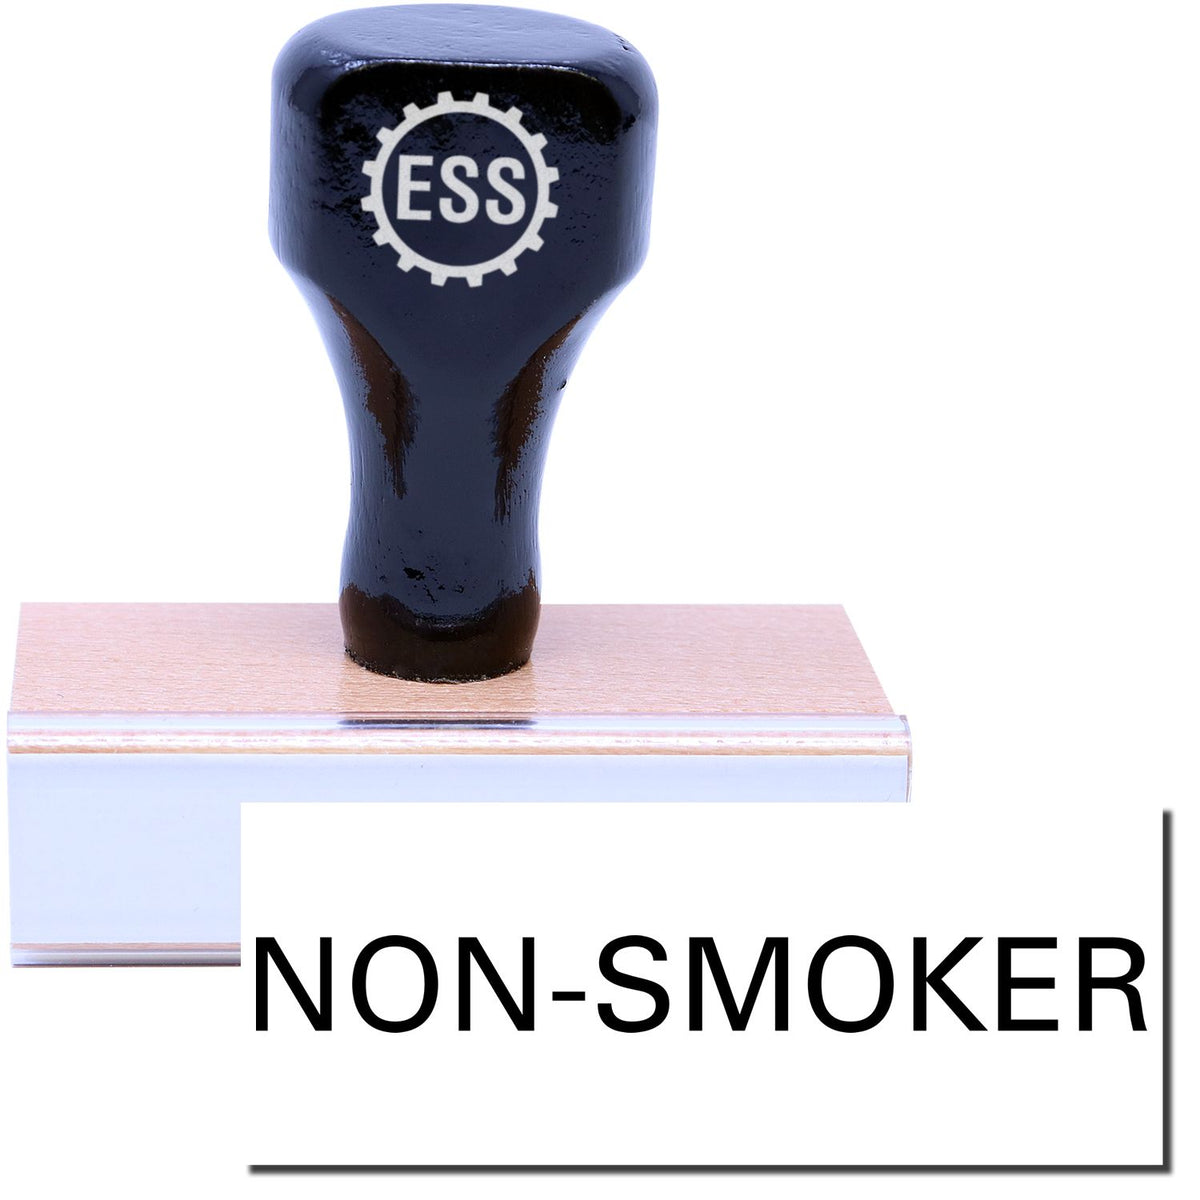 A stock office rubber stamp with a stamped image showing how the text &quot;NON-SMOKER&quot; is displayed after stamping.